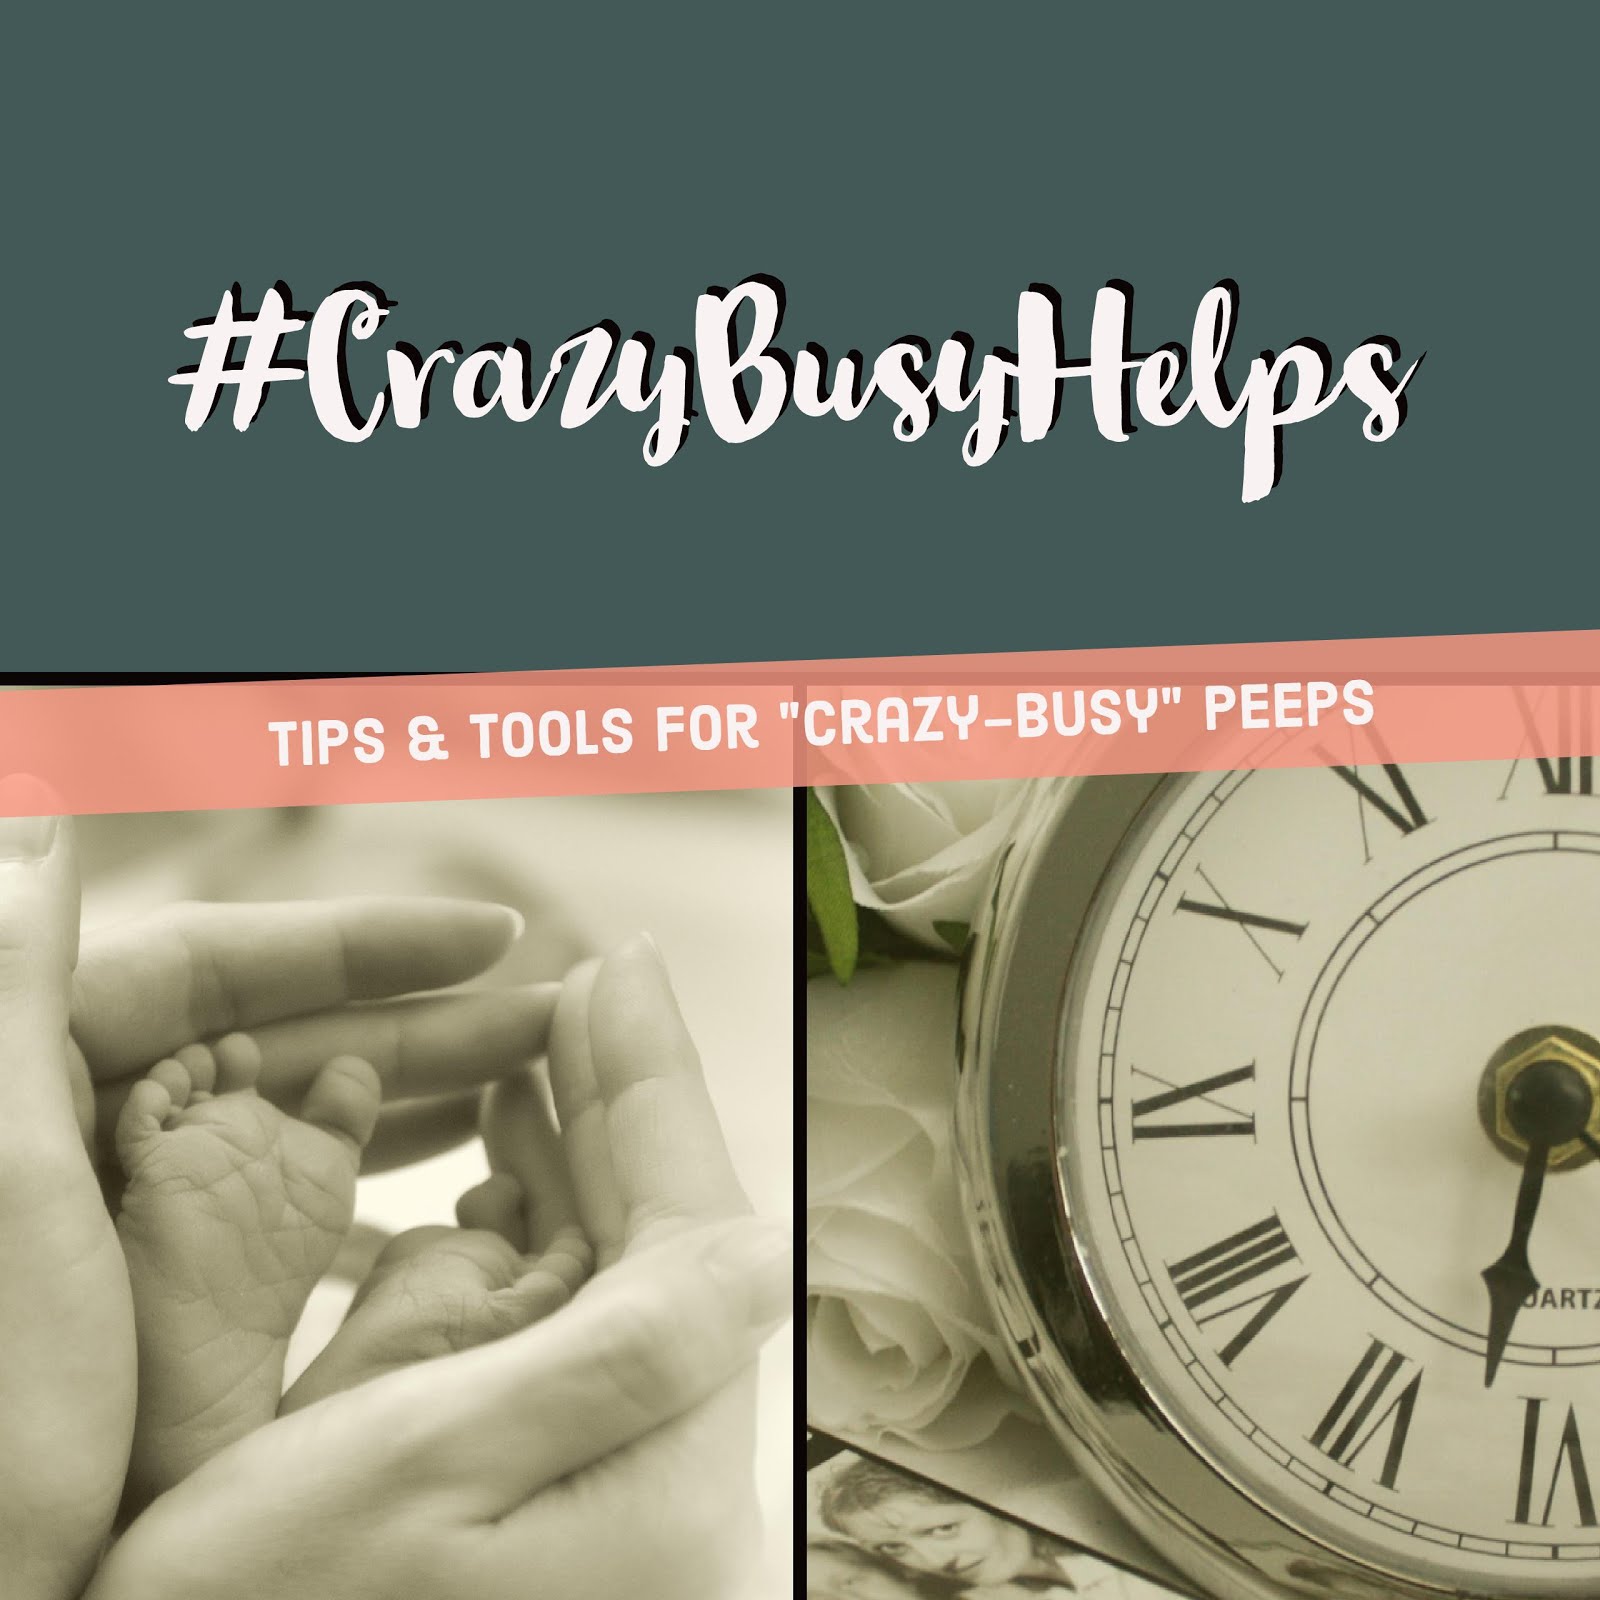 Crazy-busy Helps Series